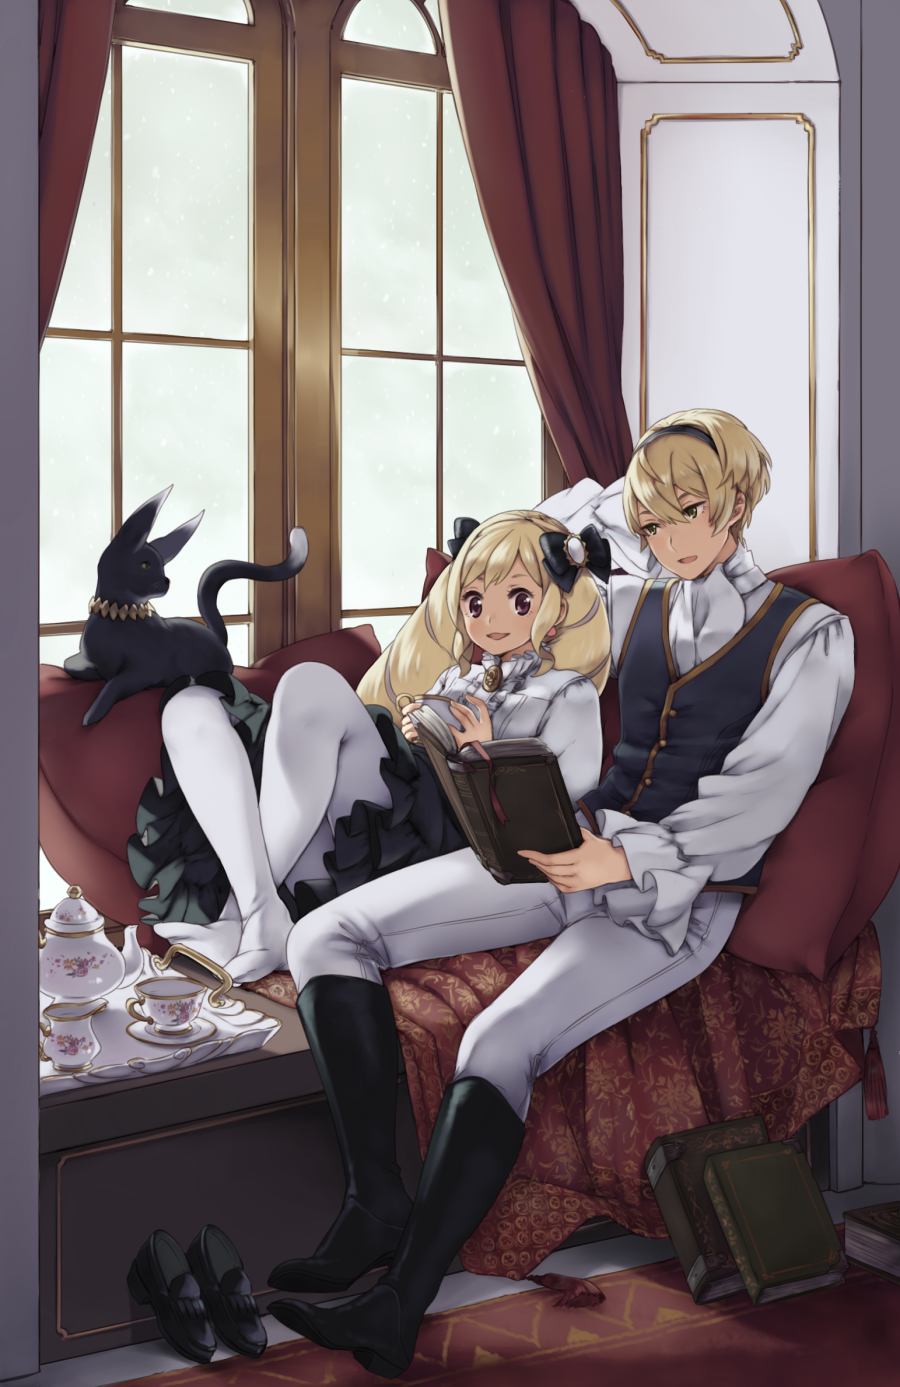 1boy 1girl animal blonde_hair book brother_and_sister cat couch drill_hair elise_(fire_emblem_if) fire_emblem fire_emblem_if highres holding holding_book indoors leon_(fire_emblem_if) pantyhose siblings sitting smile white_legwear